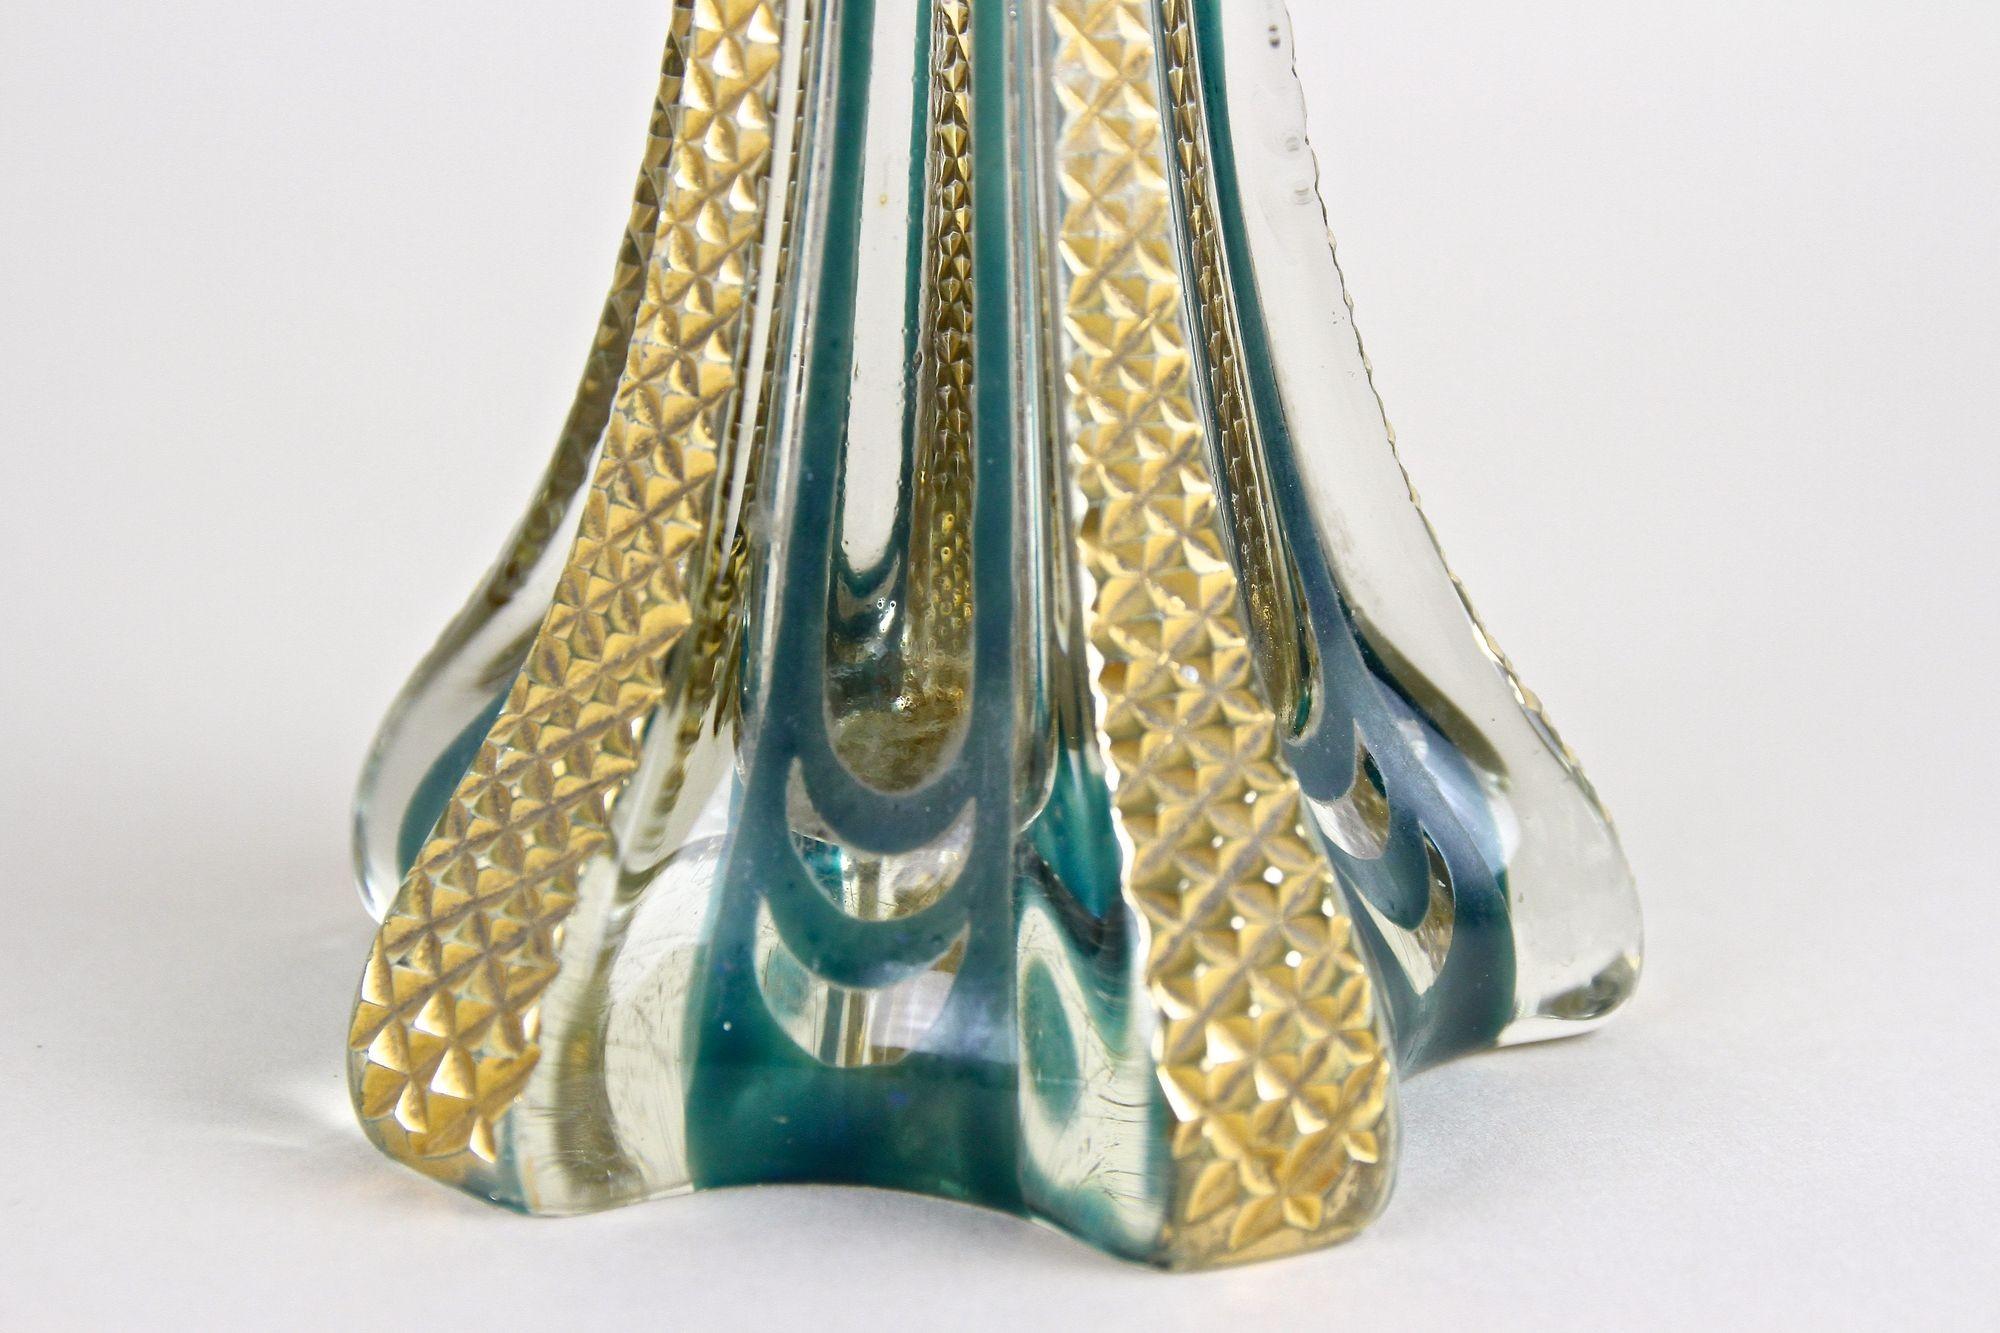 Murano Glass Vase With Gold Accents, Early 20th Century - Italy ca. 1930 For Sale 16